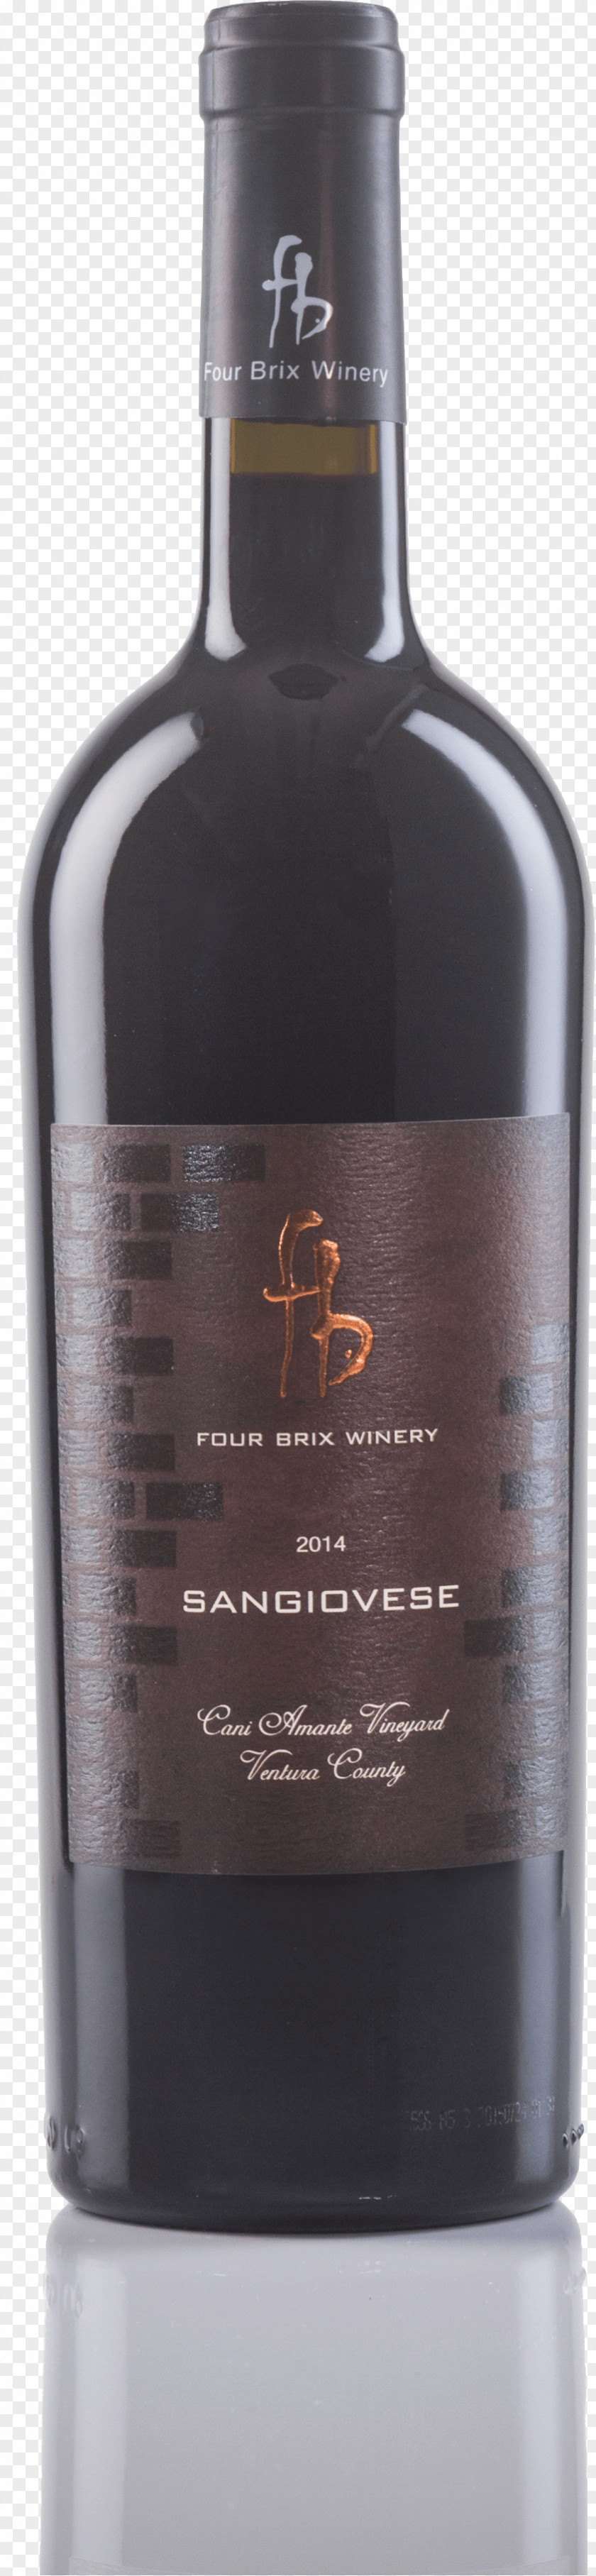 Wine Four Brix Winery And Tasting Room Liqueur Dessert Common Grape Vine PNG